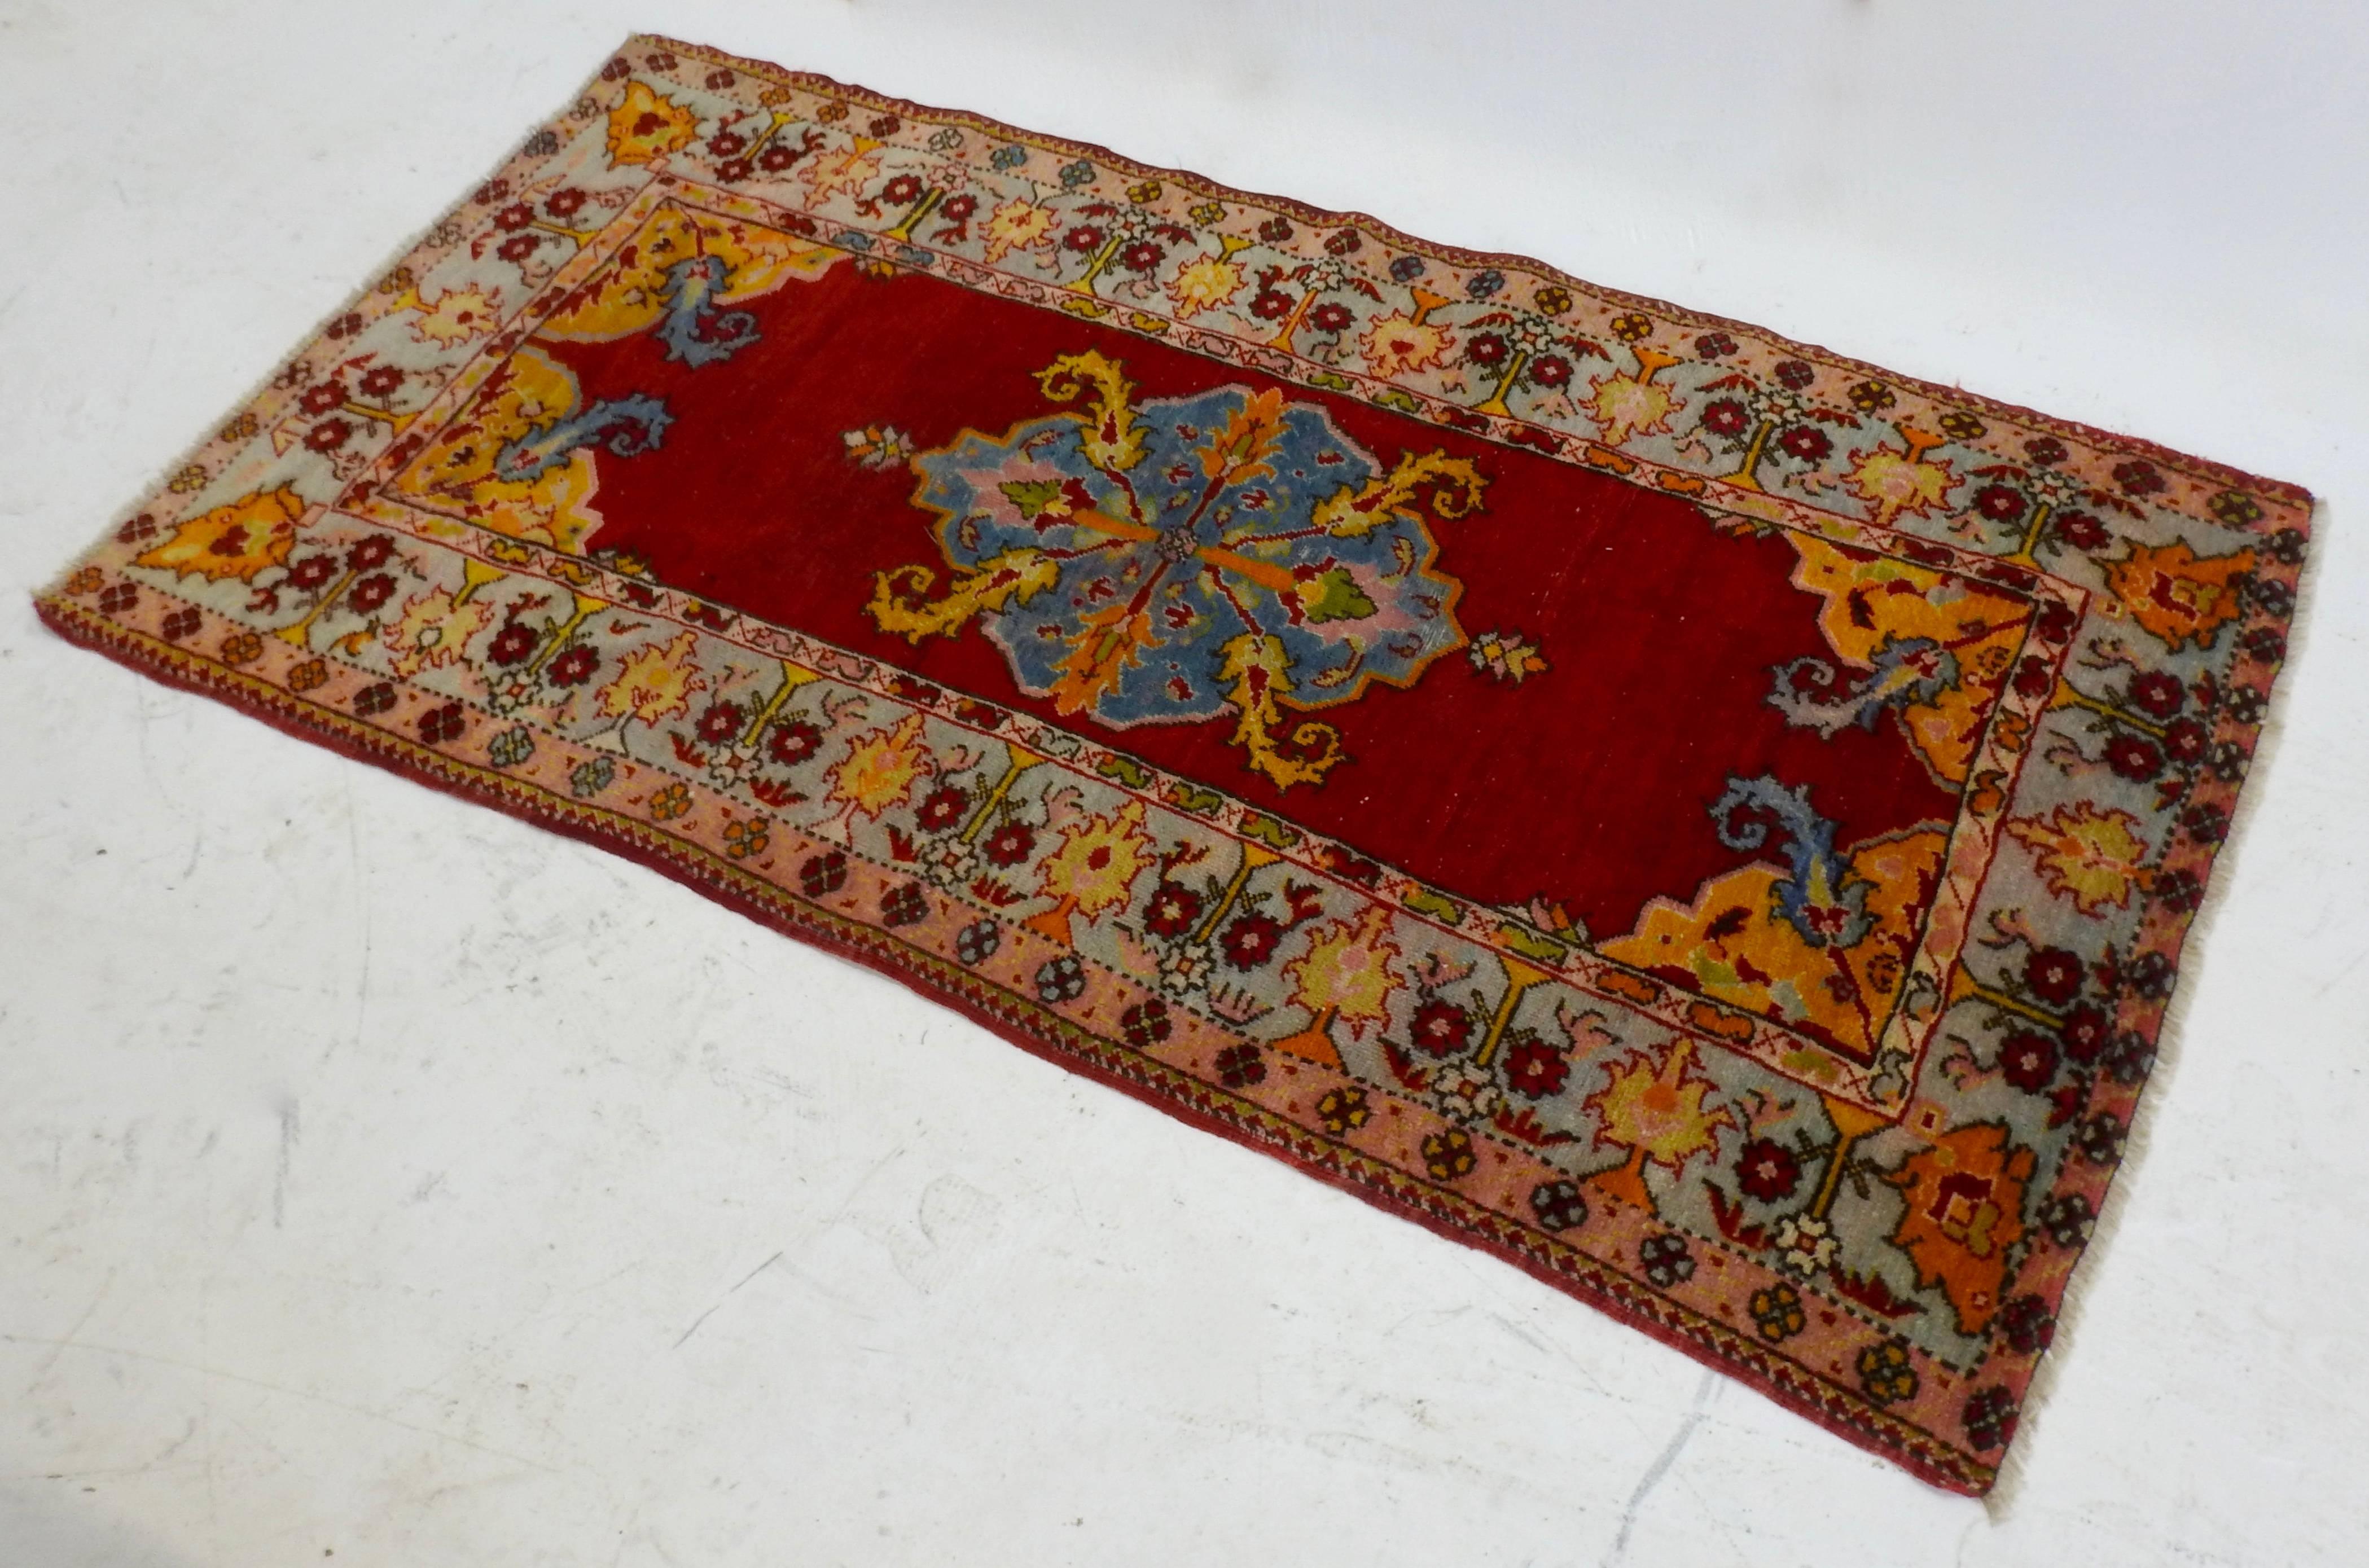 A brightly colored midcentury Turkish Oushak rug. The hand knotted rug is made of wool with a geometric design featuring a light blue medallion to the centre against a red field with a surrounding red, blue and yellow floral border. There is a short